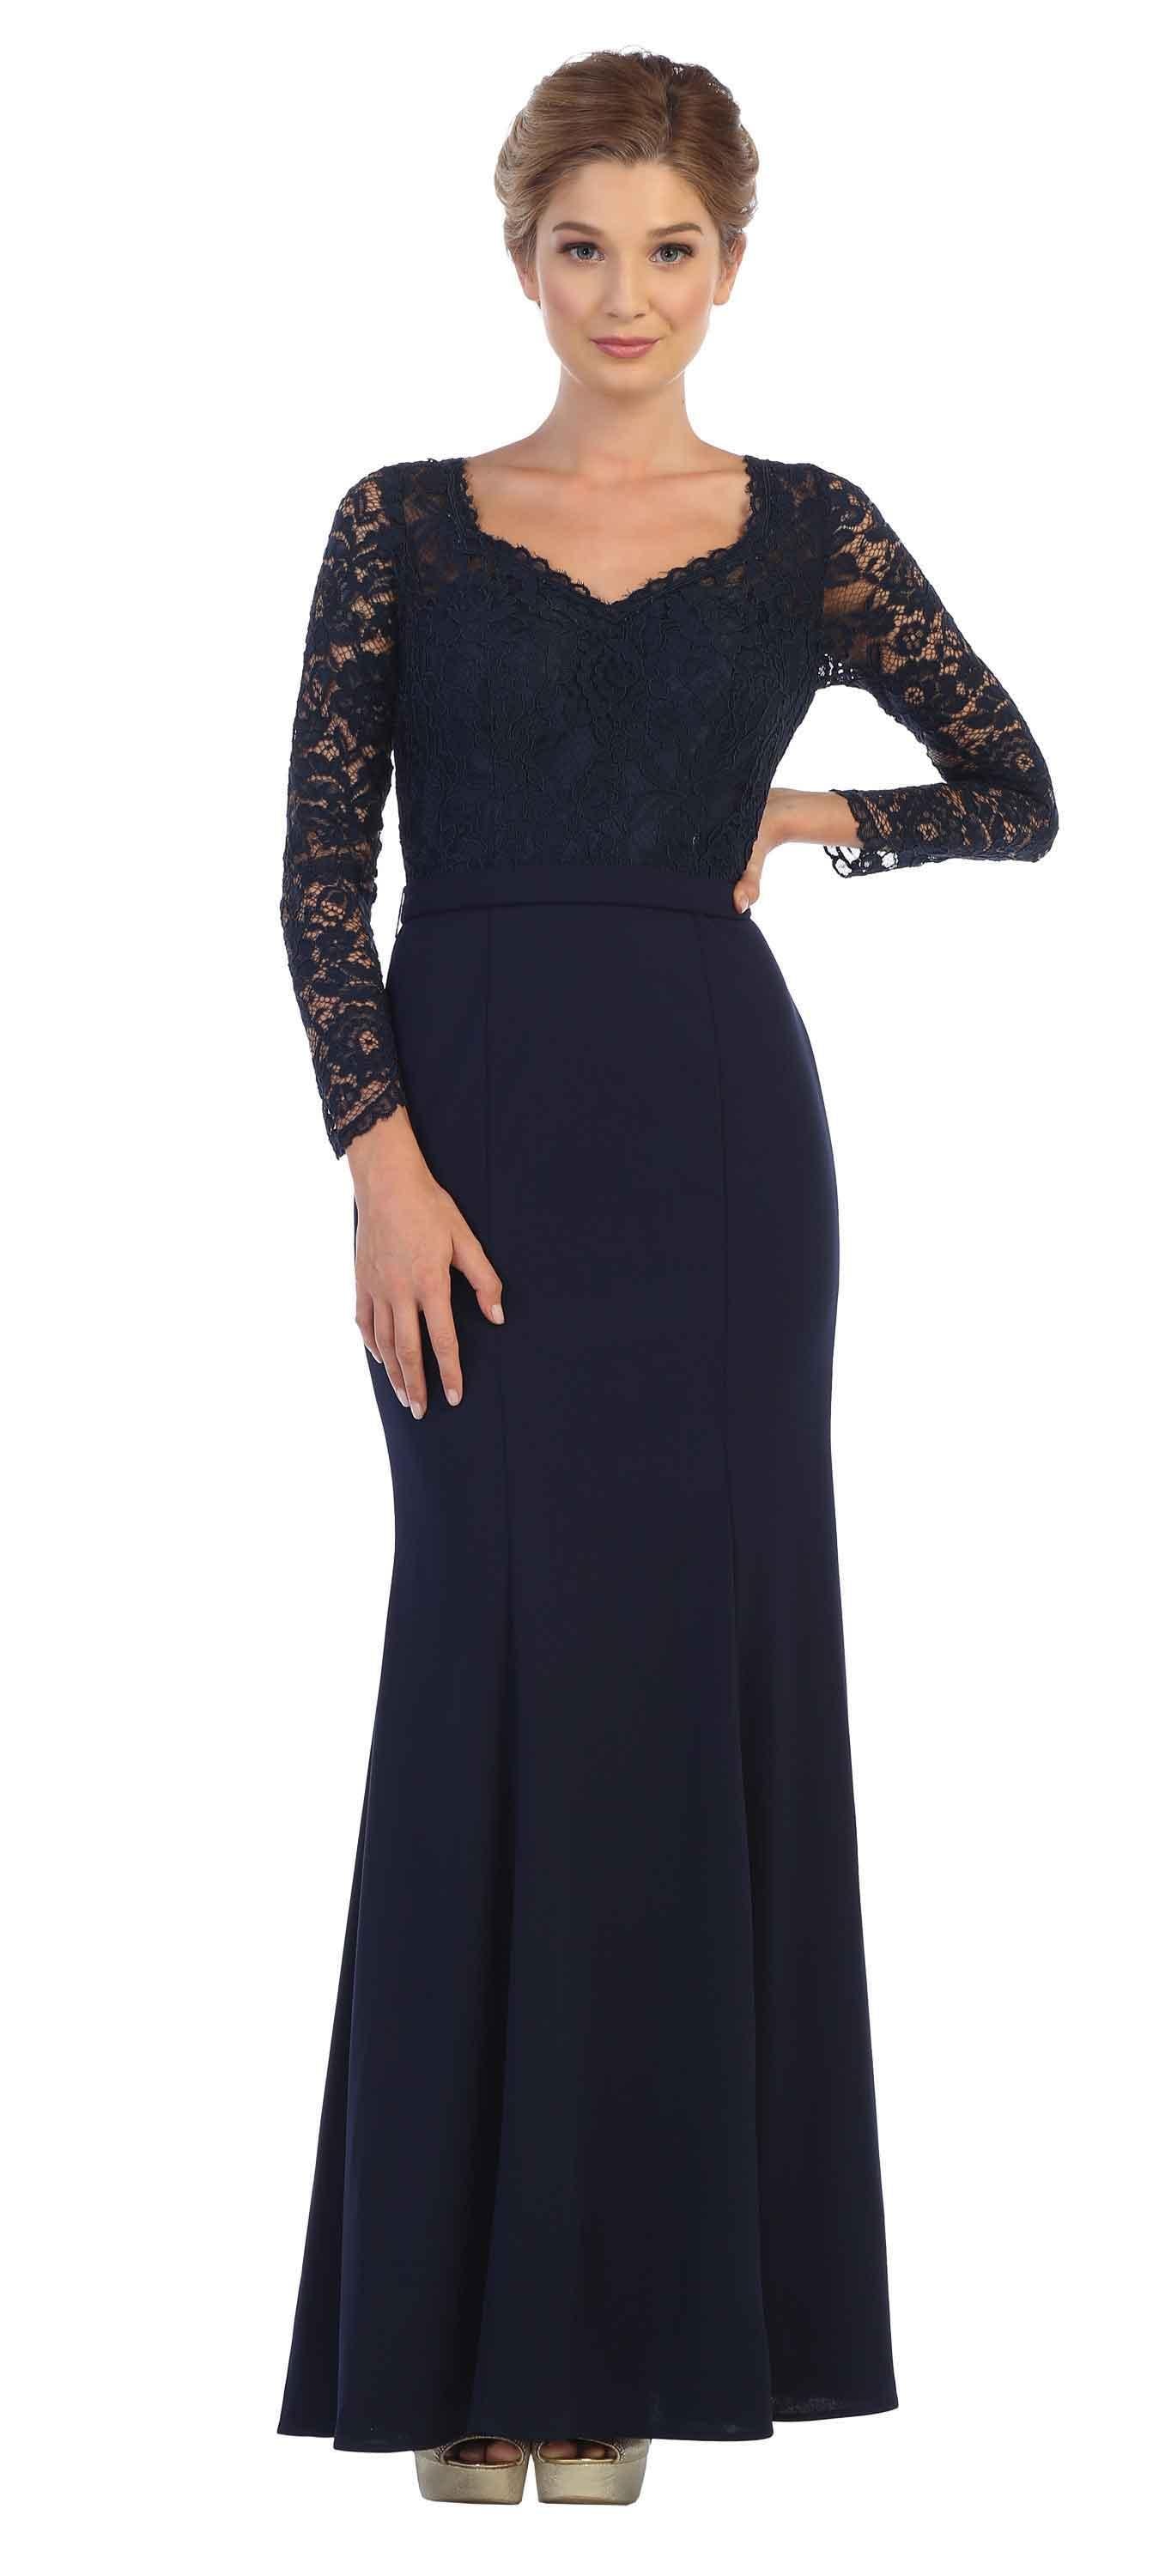 Long Sleeve Mother of the Bride Formal Dress - The Dress Outlet Eva Fashion